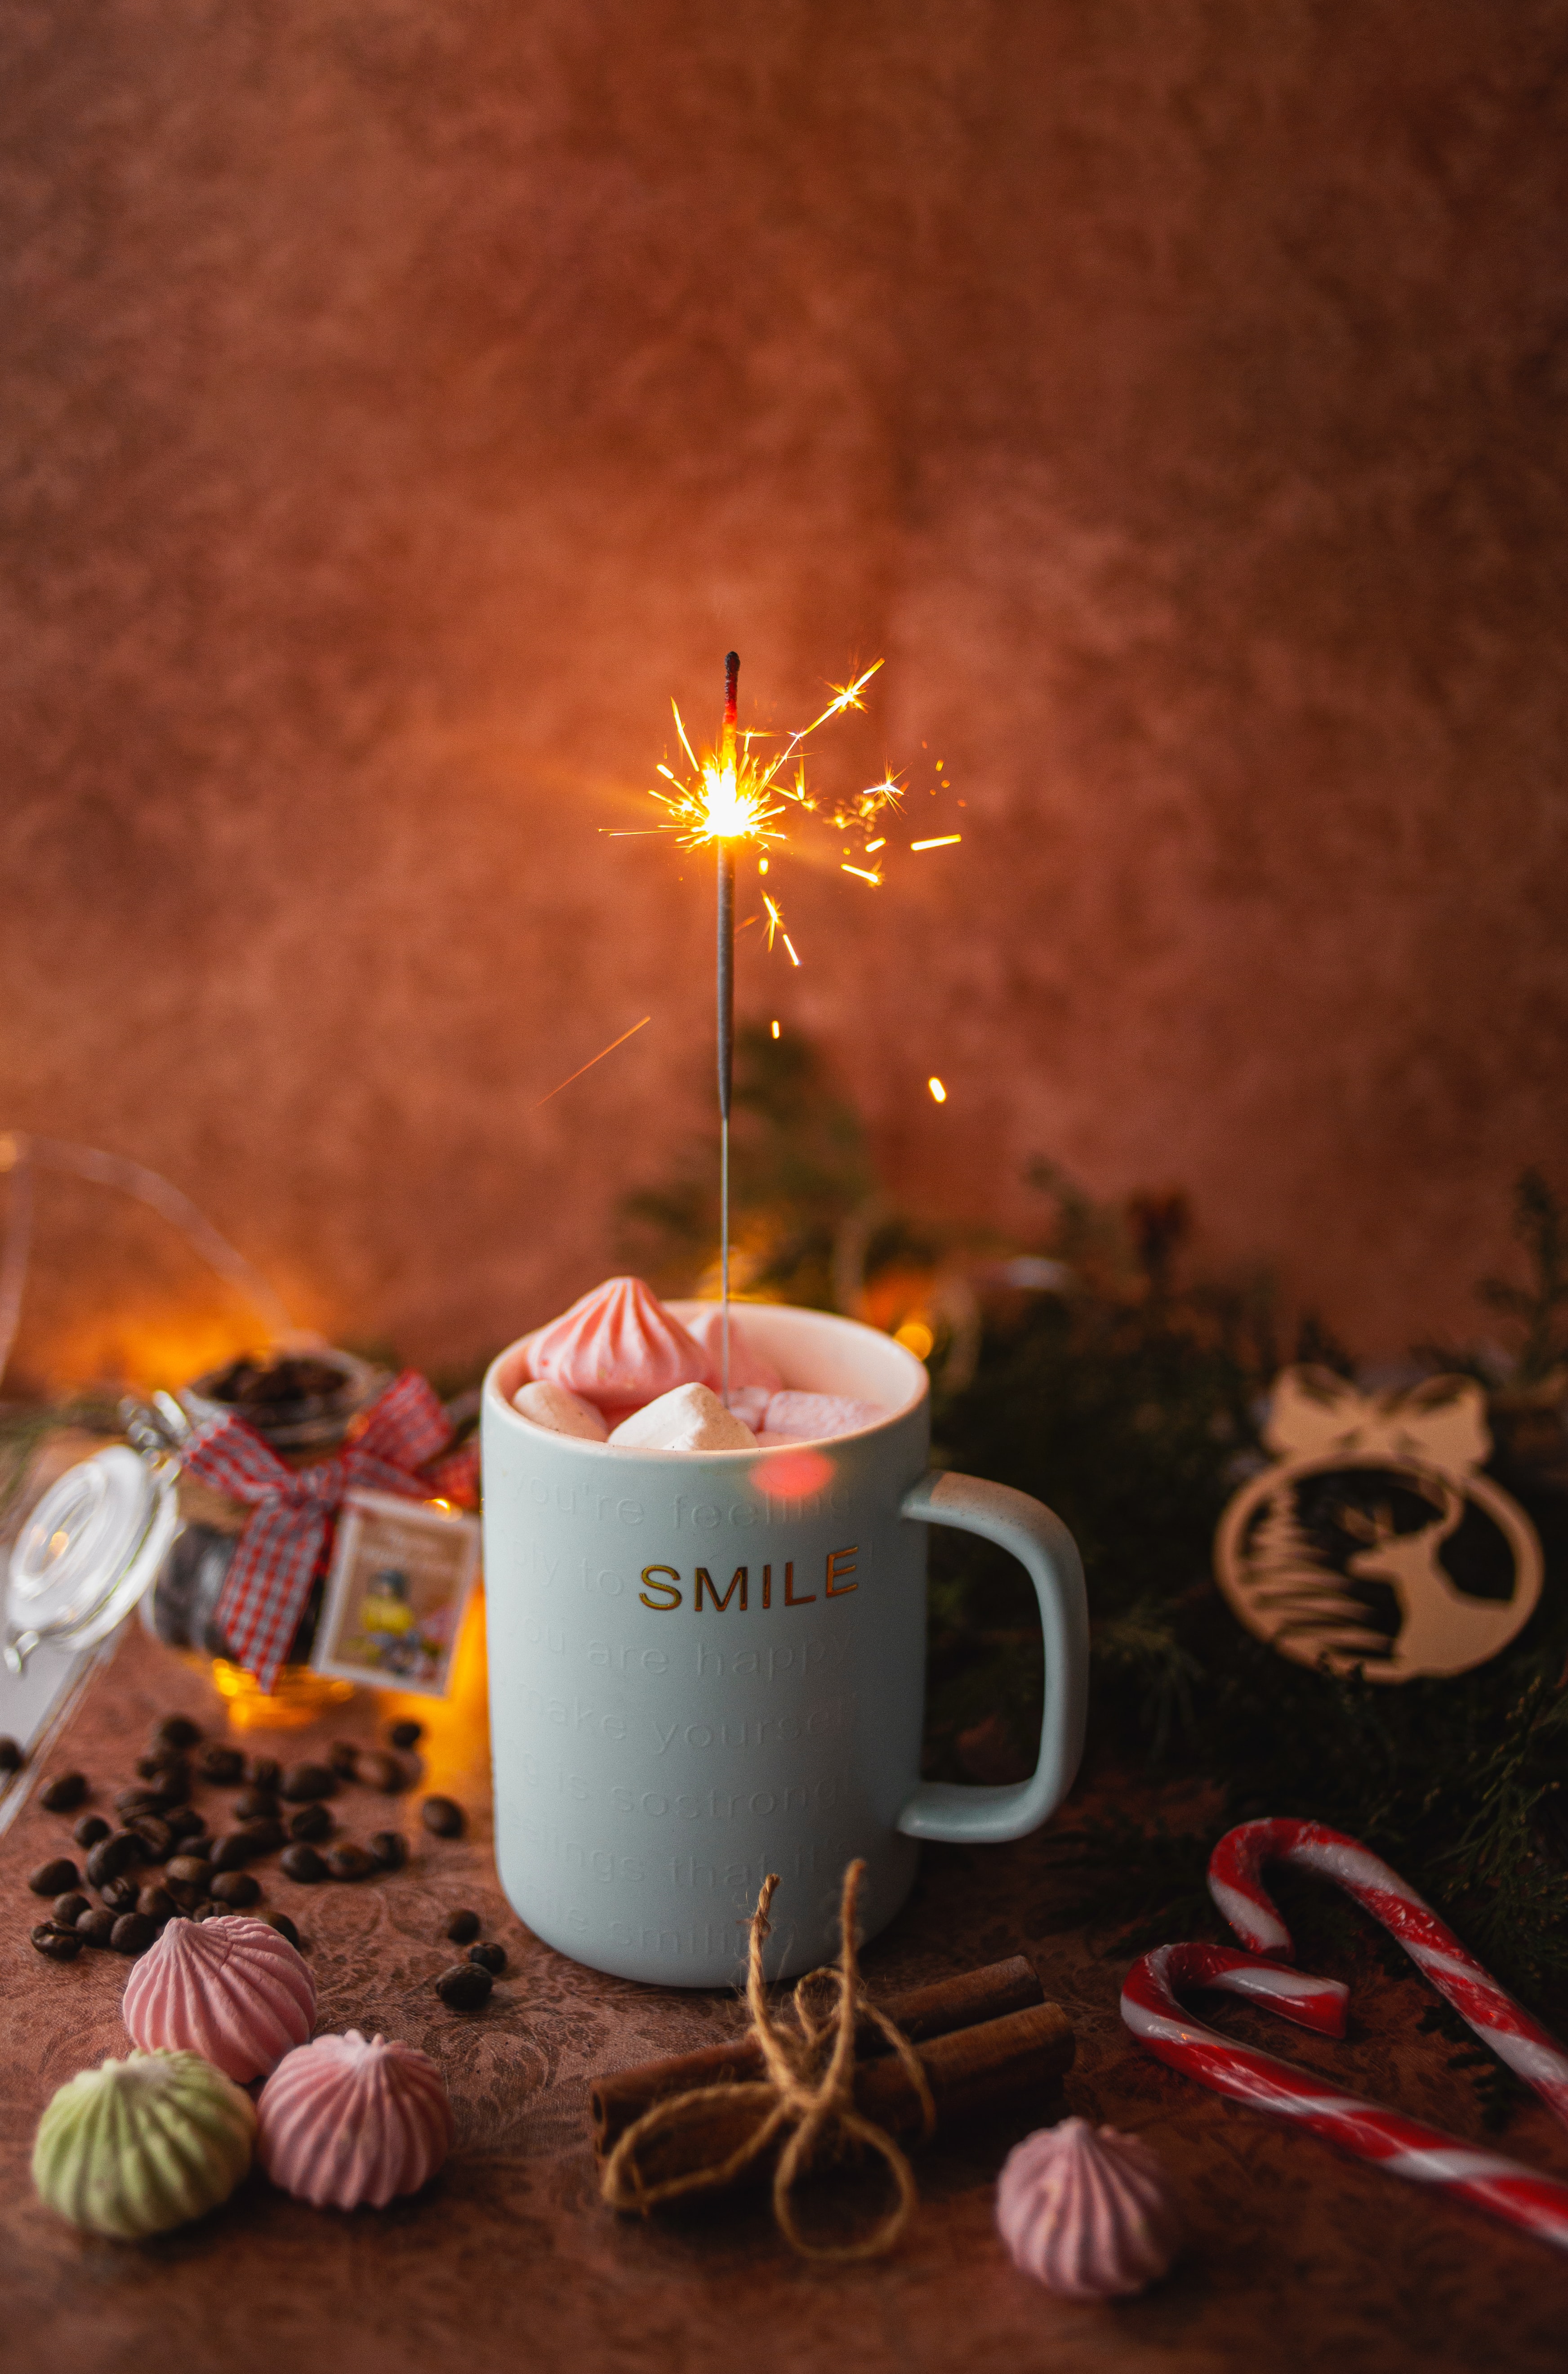 mug, miscellanea, cup, holiday, sparks, miscellaneous, marshmallow, bengal lights, sparklers, zephyr